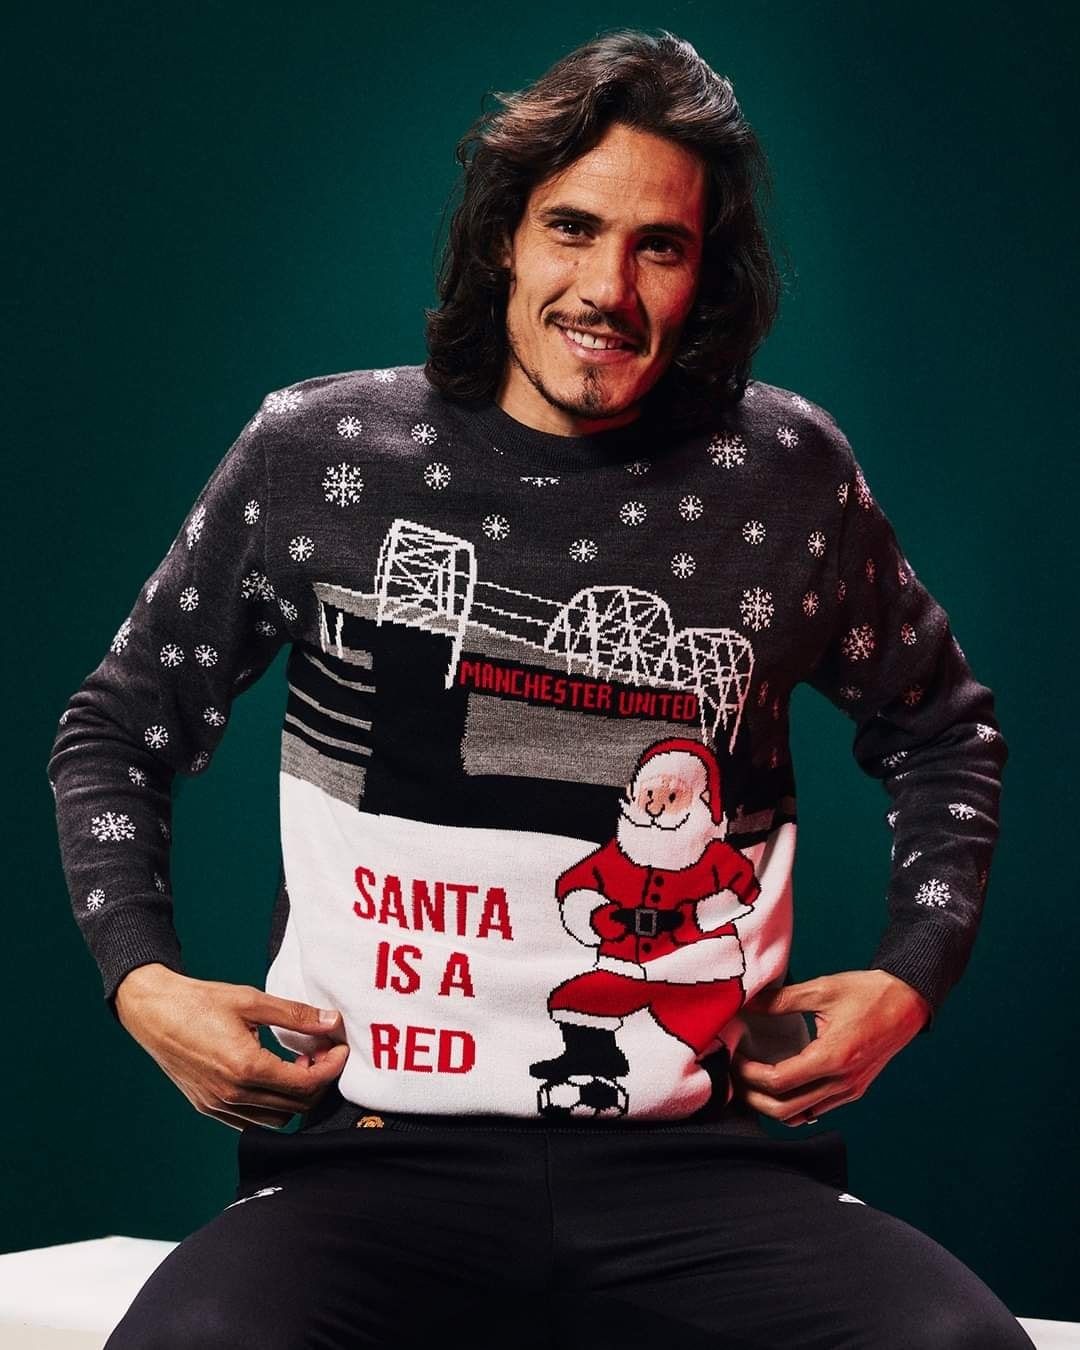 [HOT] Manchester United Cavani Santa is a Red ugly christmas sweater – Saleoff 111221